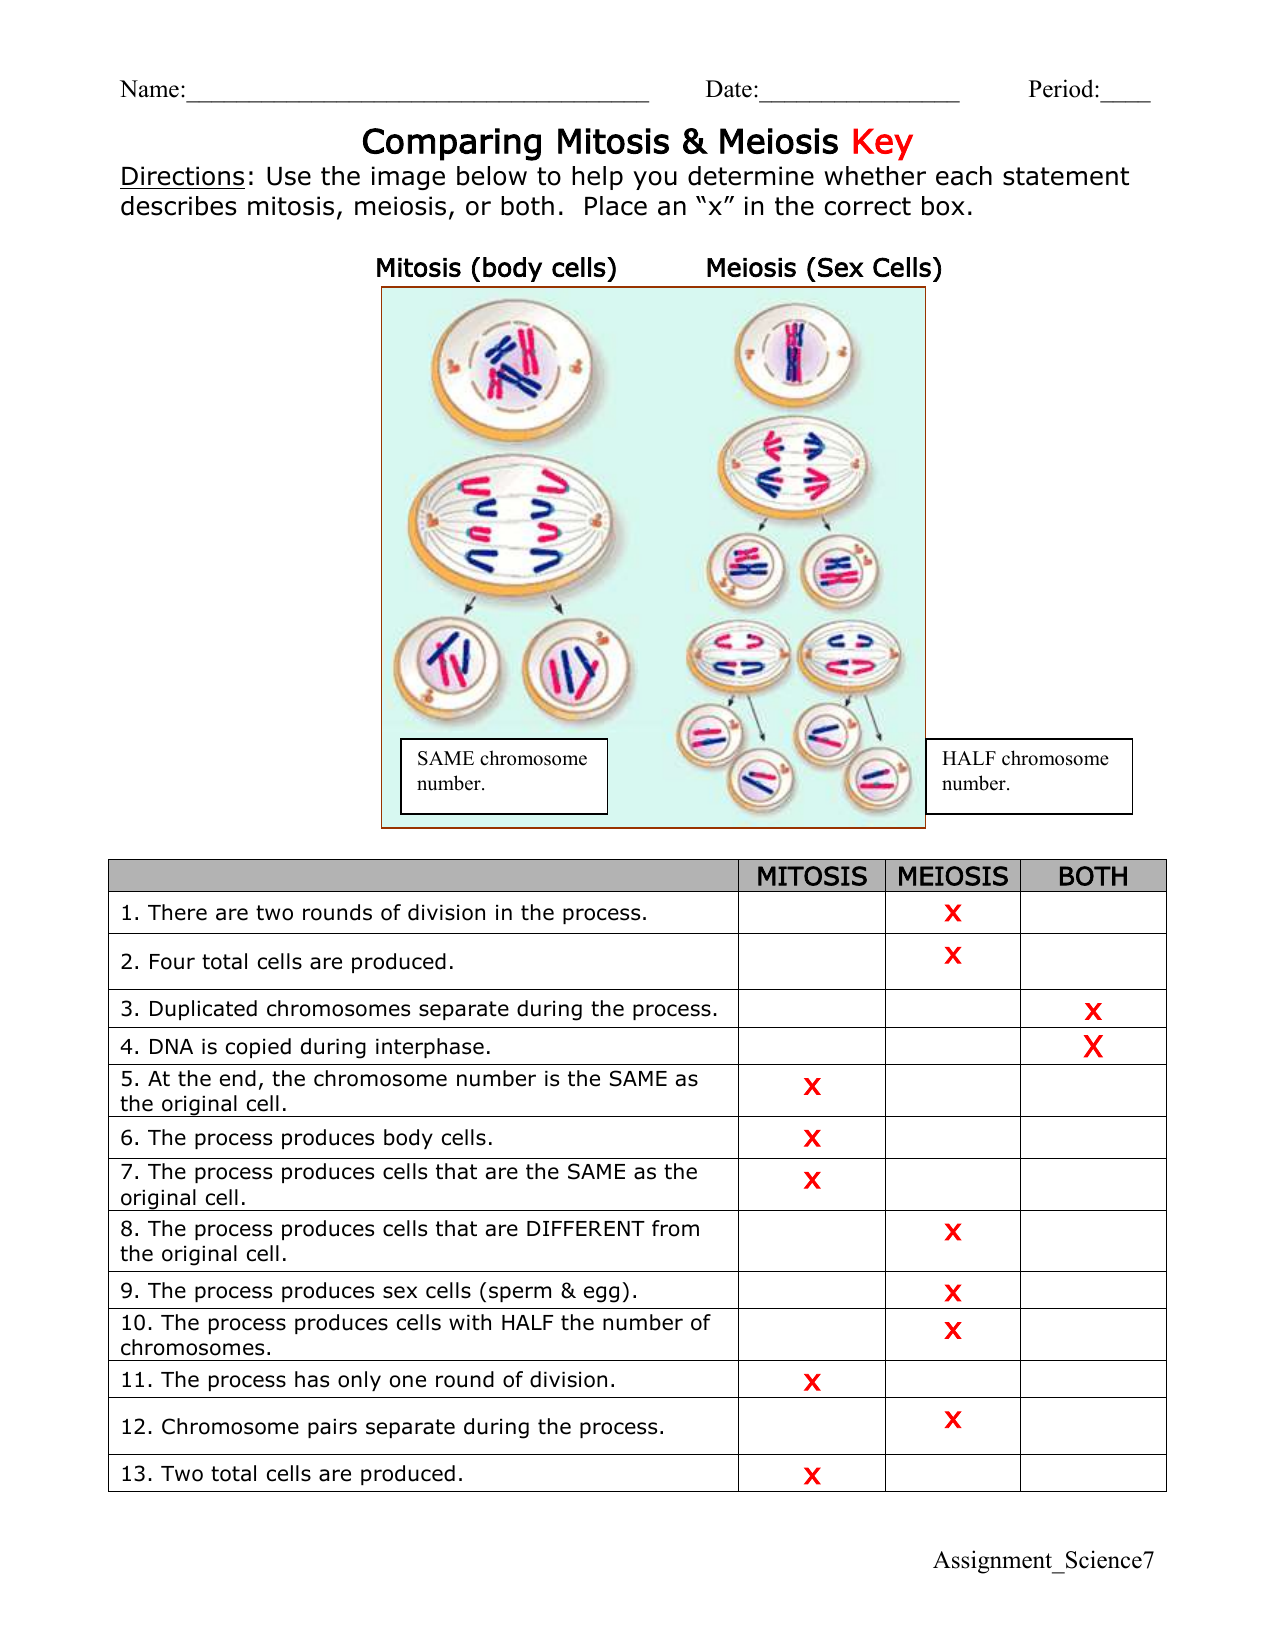 Biology Comparing Mitosis And Meiosis Worksheet Answers TUTORE ORG